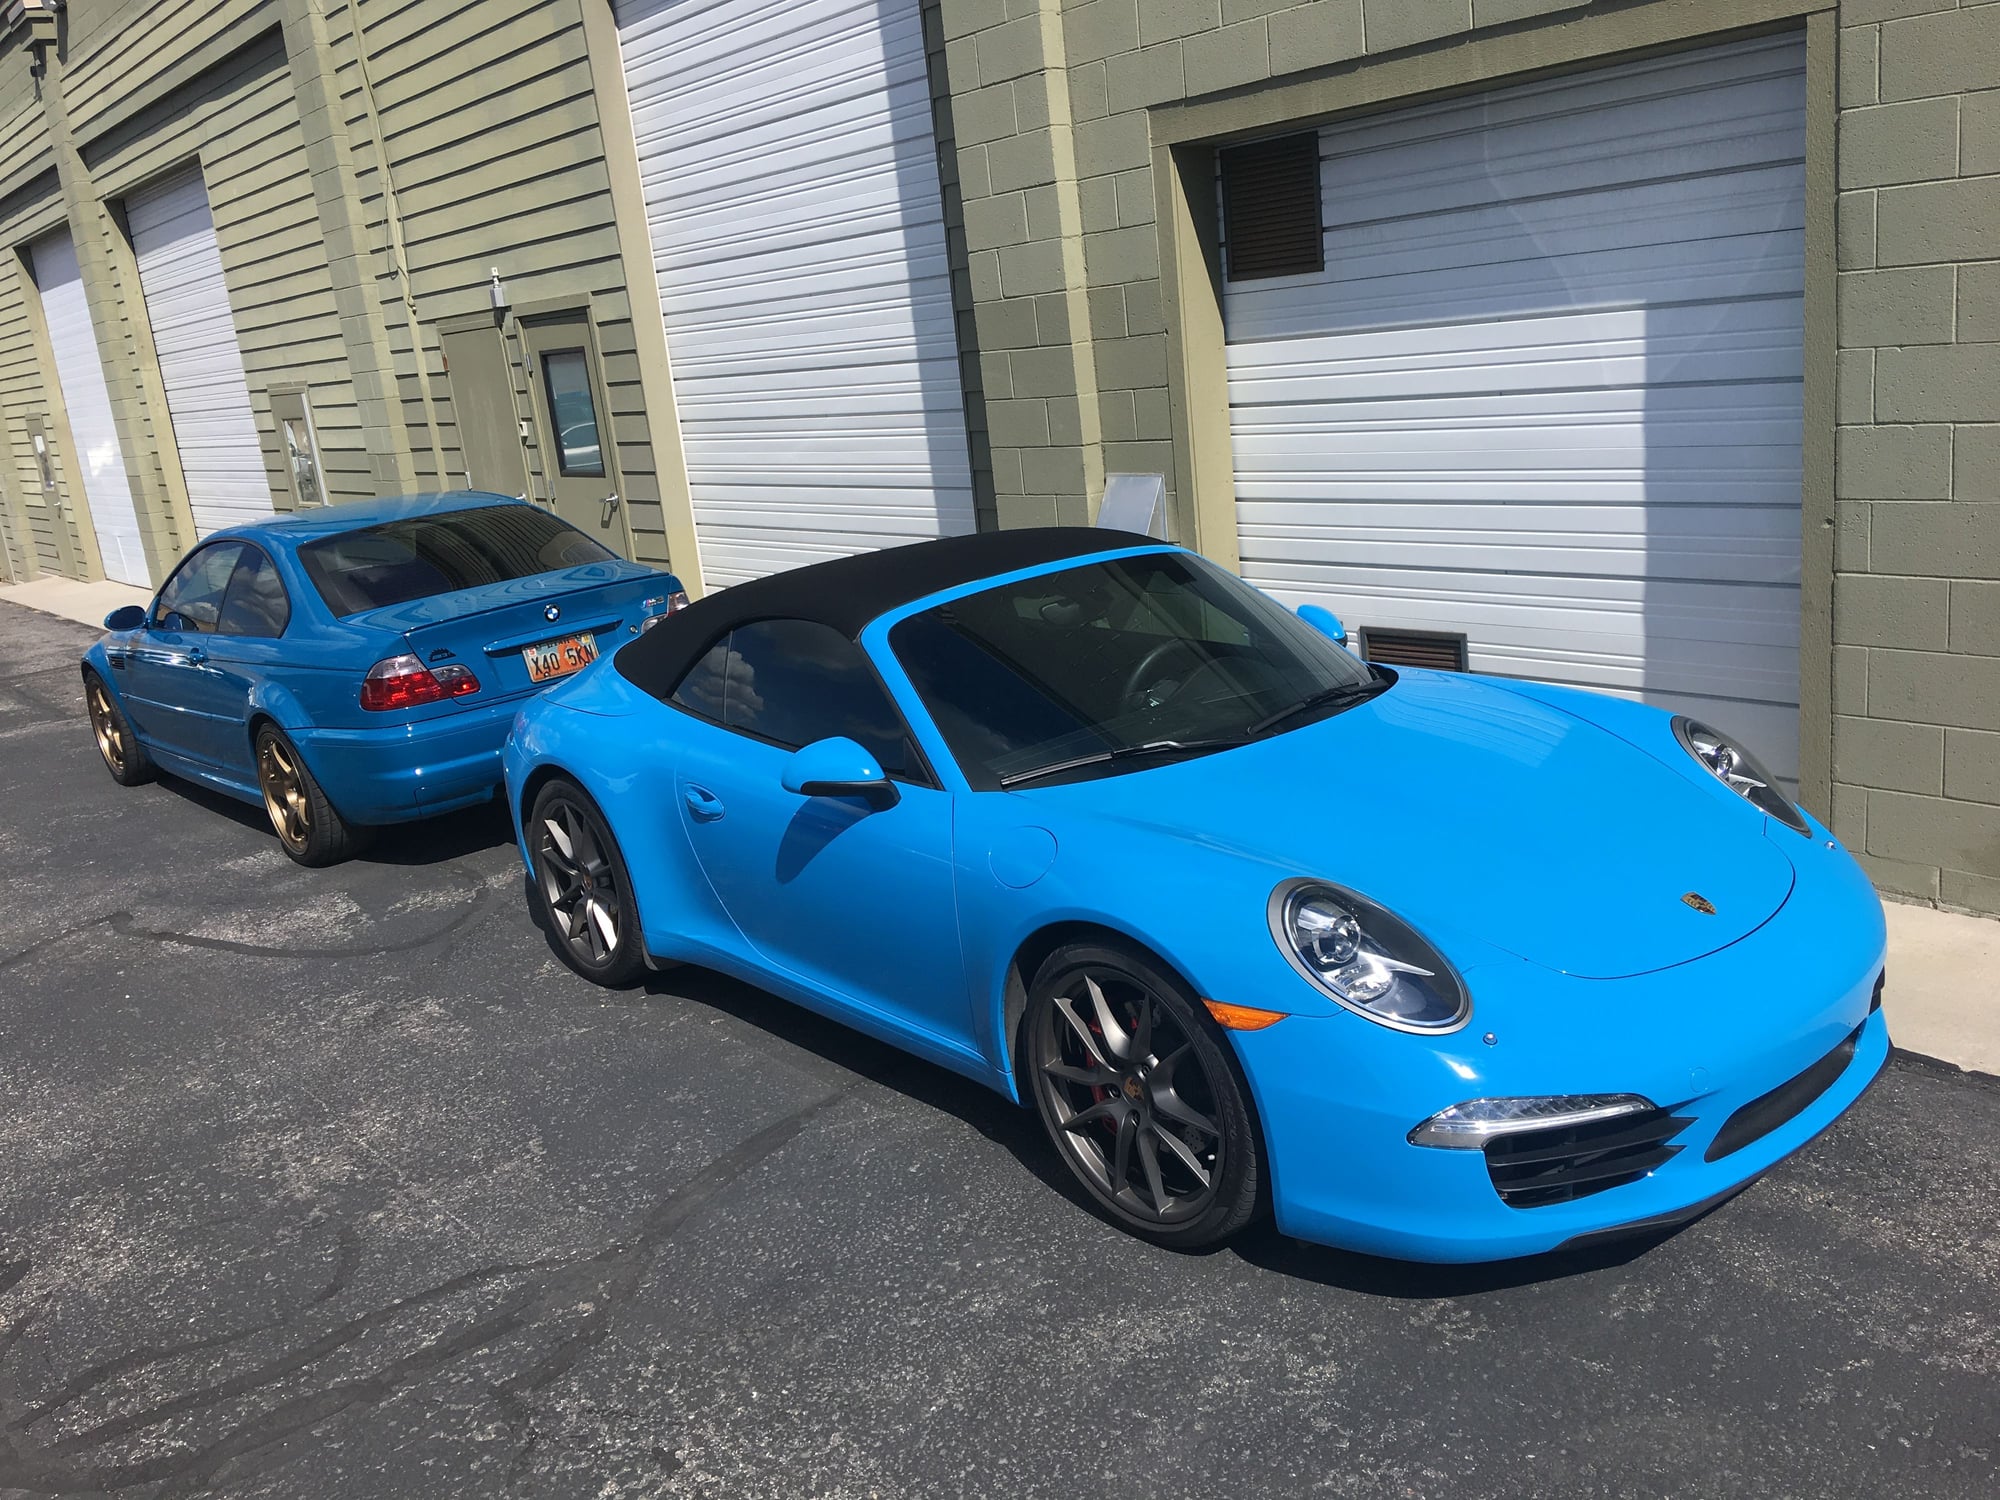 2013 Porsche 911 - 2013 991S Cab PDK PTS Mexico Blue - Used - VIN WP0CB2A92DS155241 - 13,250 Miles - 6 cyl - 2WD - Automatic - Convertible - Blue - Park City, UT 84060, United States